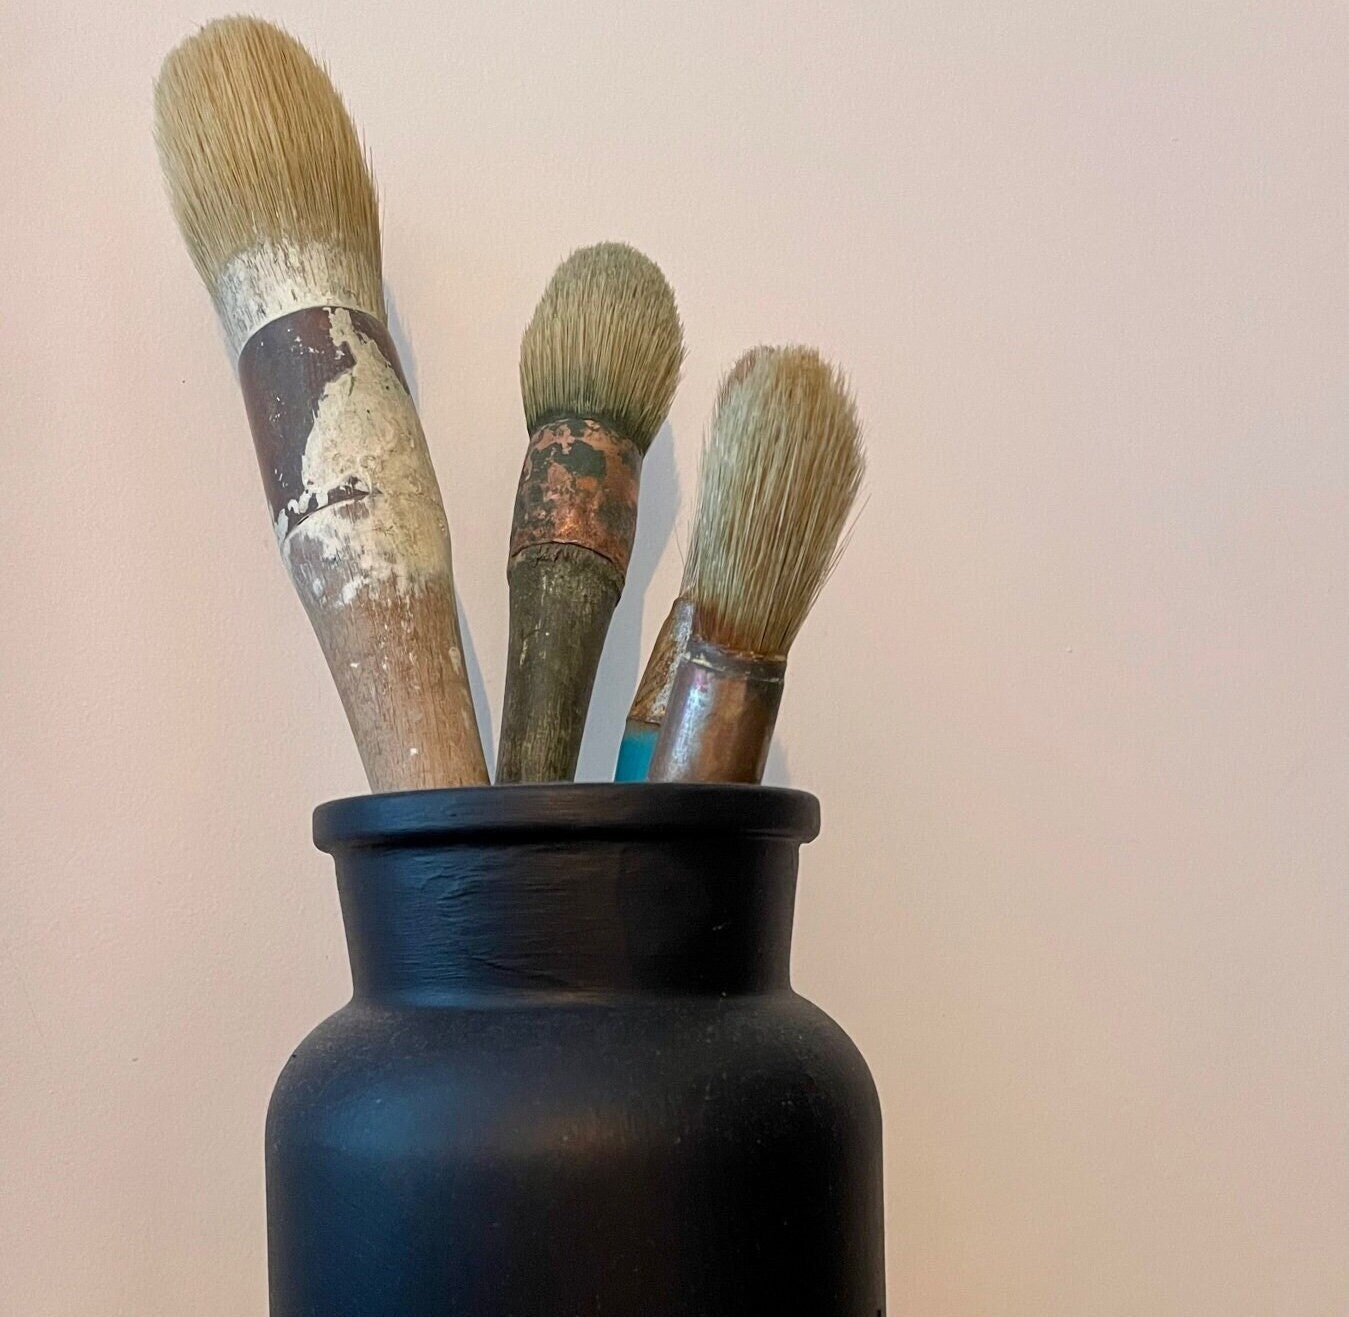 Big Blue Brush for Painting, Vintage Distressed Paint Wooden